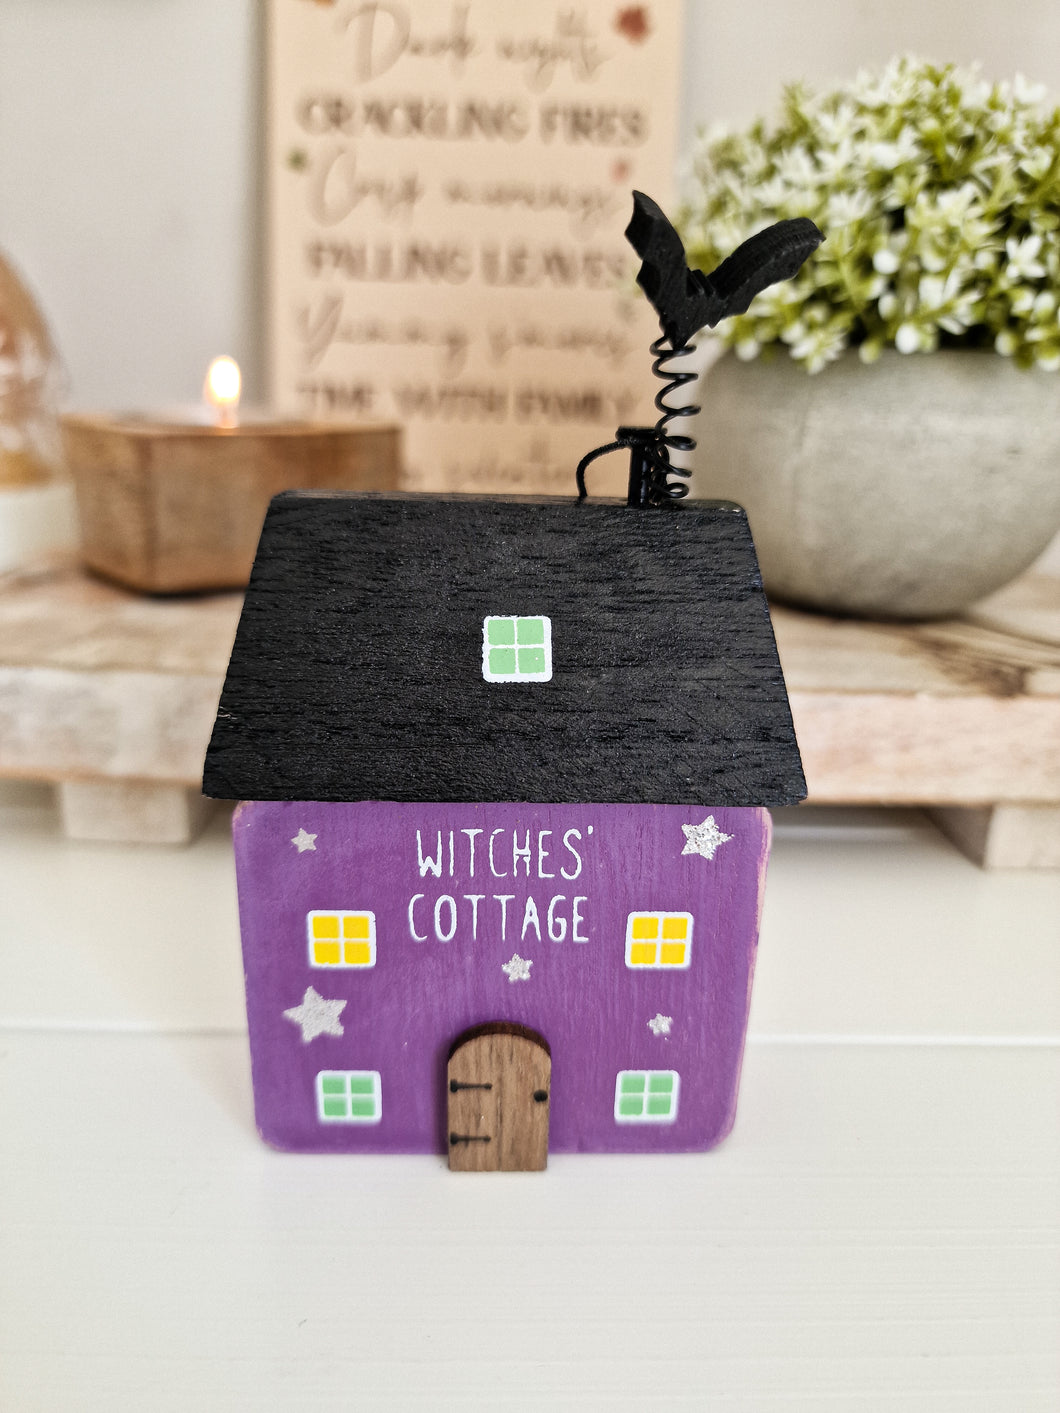 Witches Cottage Miniature Wooden Ornament